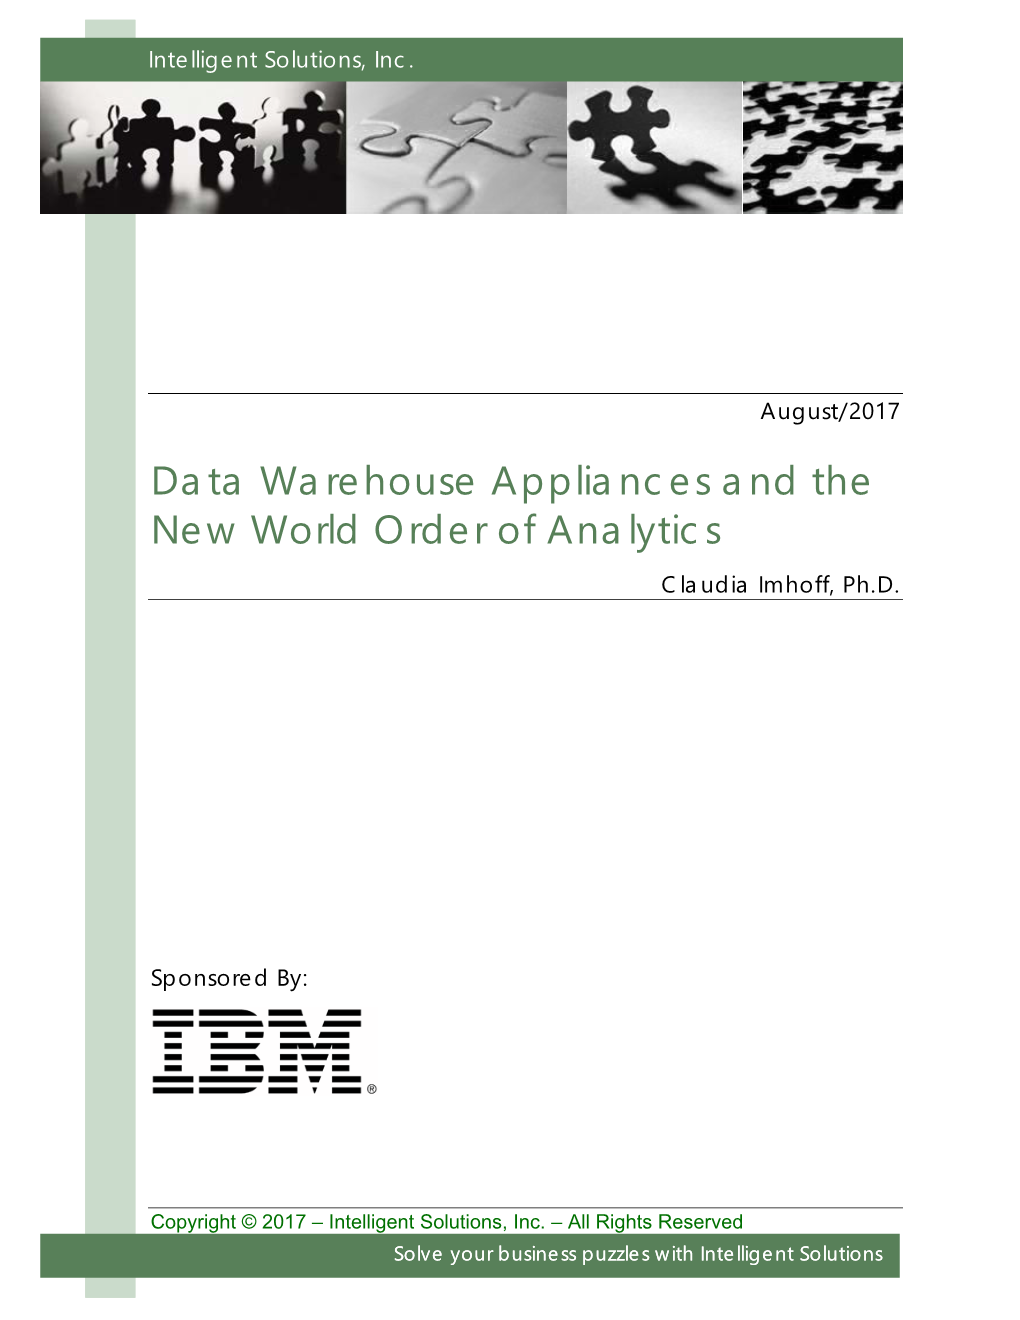 Data Warehouse Appliances and the New World Order of Analytics Claudia Imhoff, Ph.D